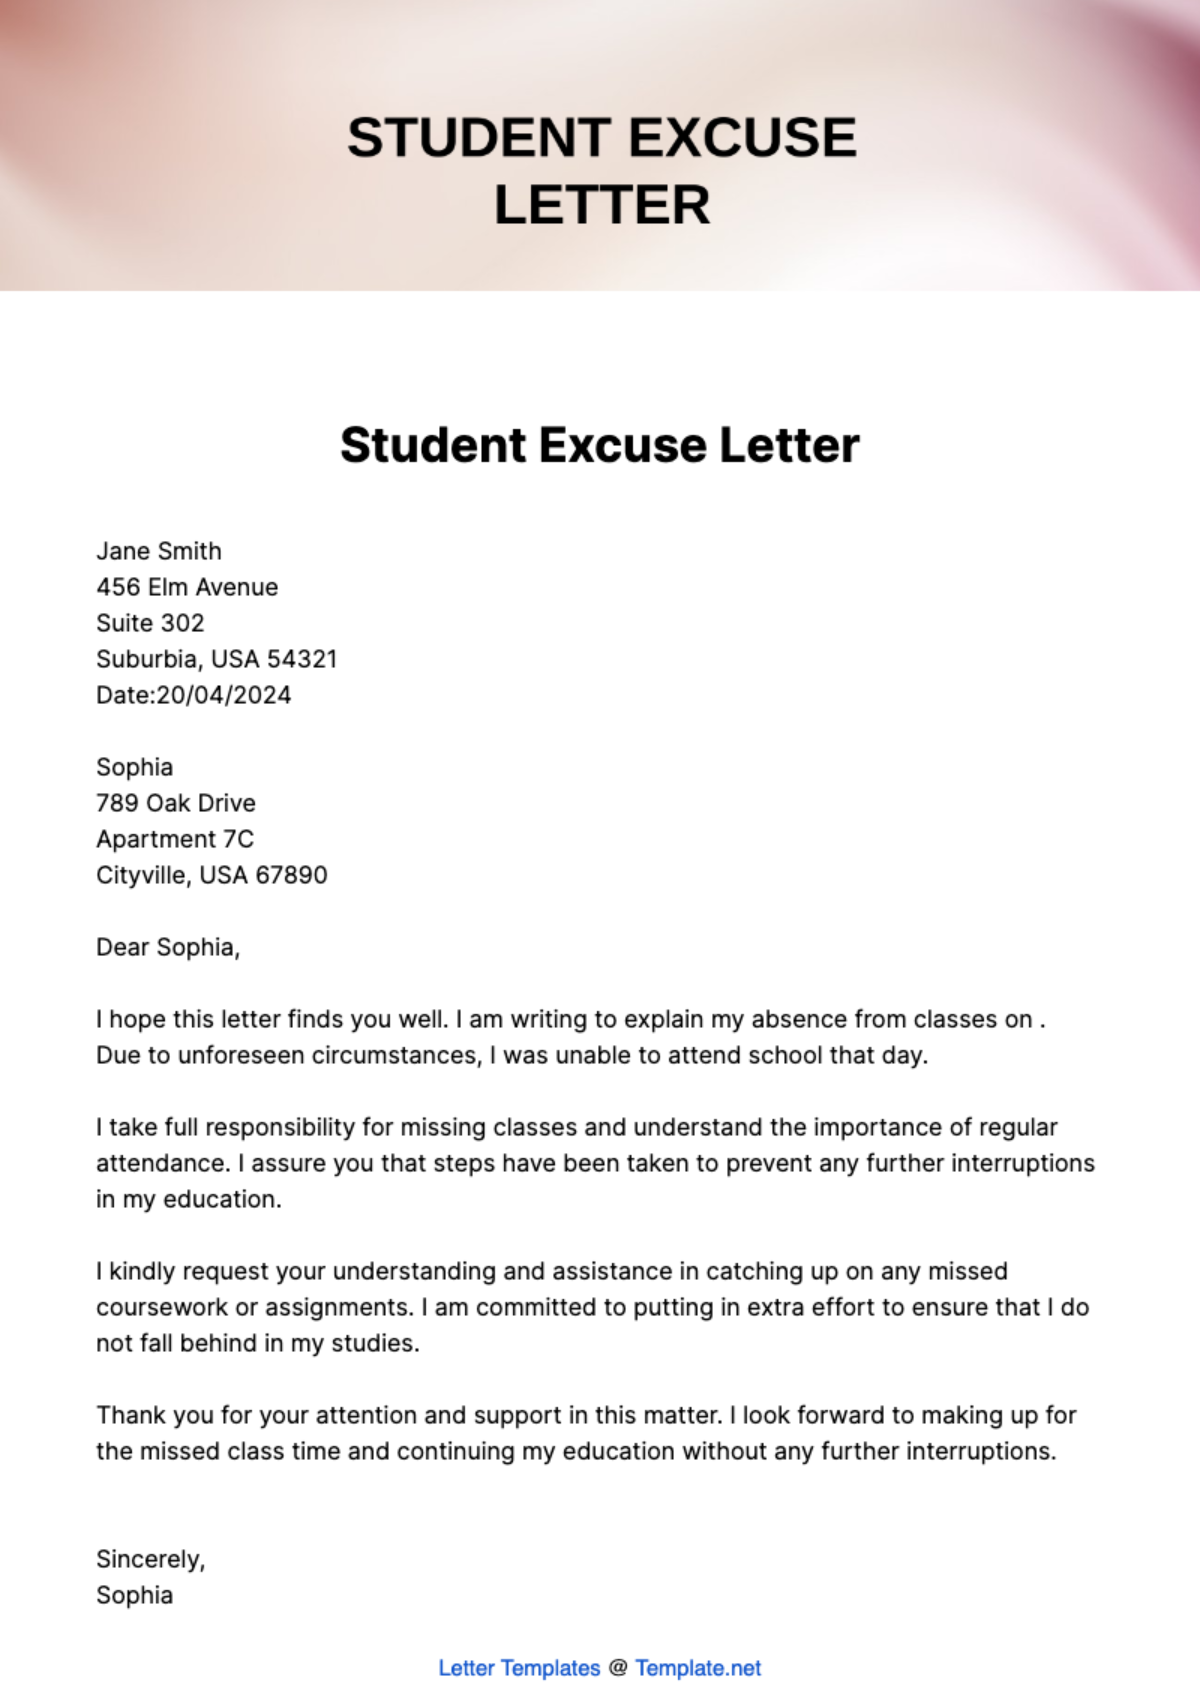 Student Excuse Letter Template